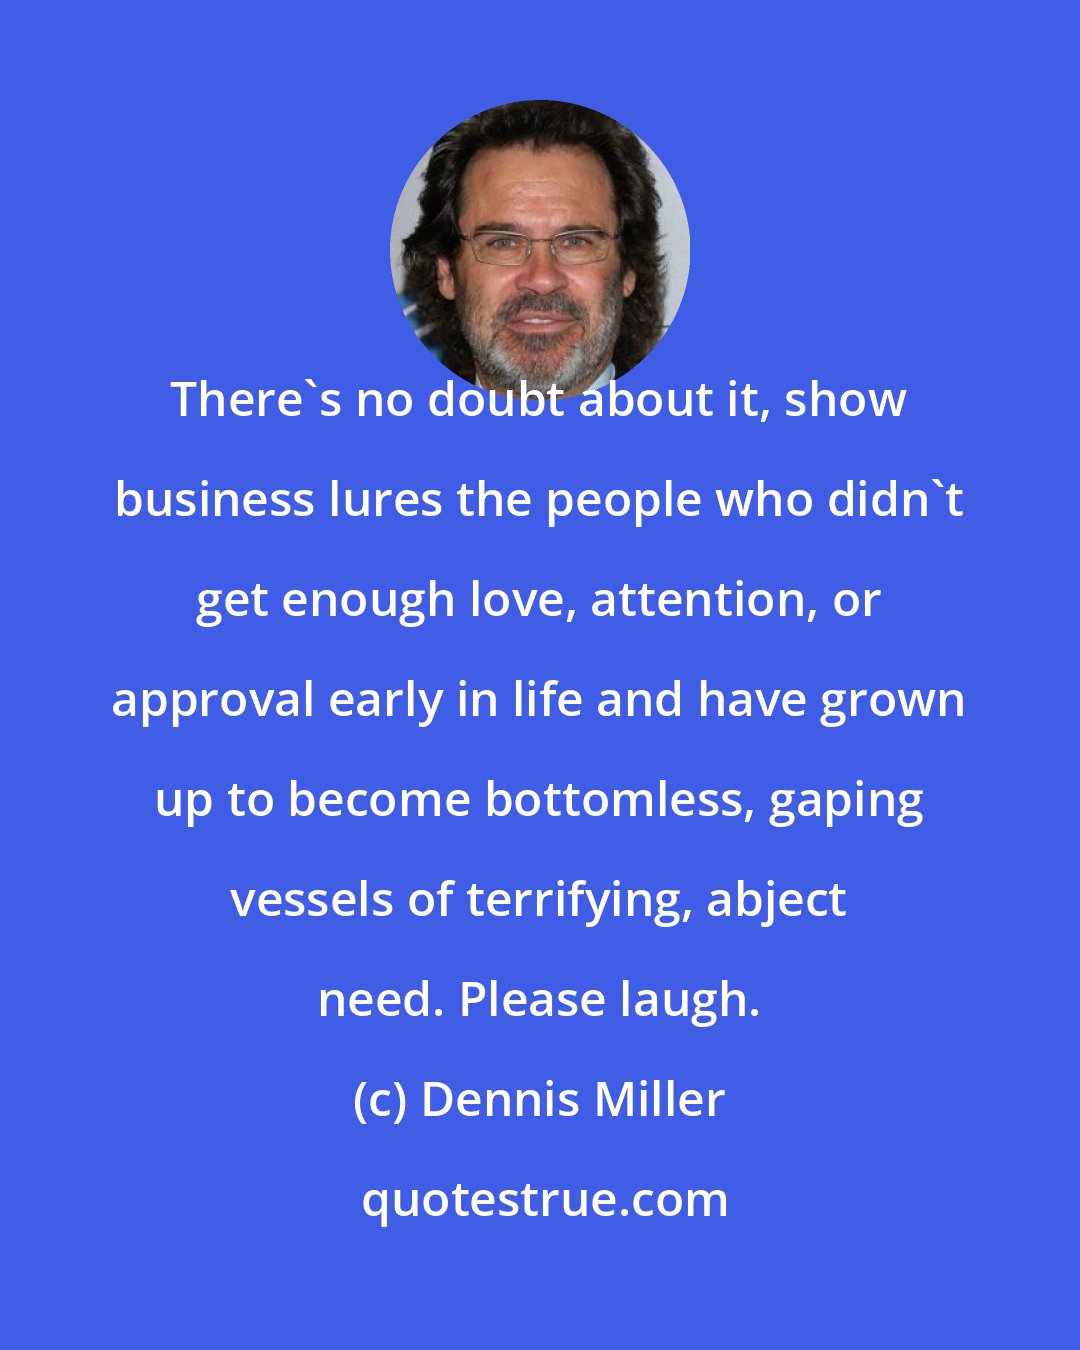 Dennis Miller: There's no doubt about it, show business lures the people who didn't get enough love, attention, or approval early in life and have grown up to become bottomless, gaping vessels of terrifying, abject need. Please laugh.